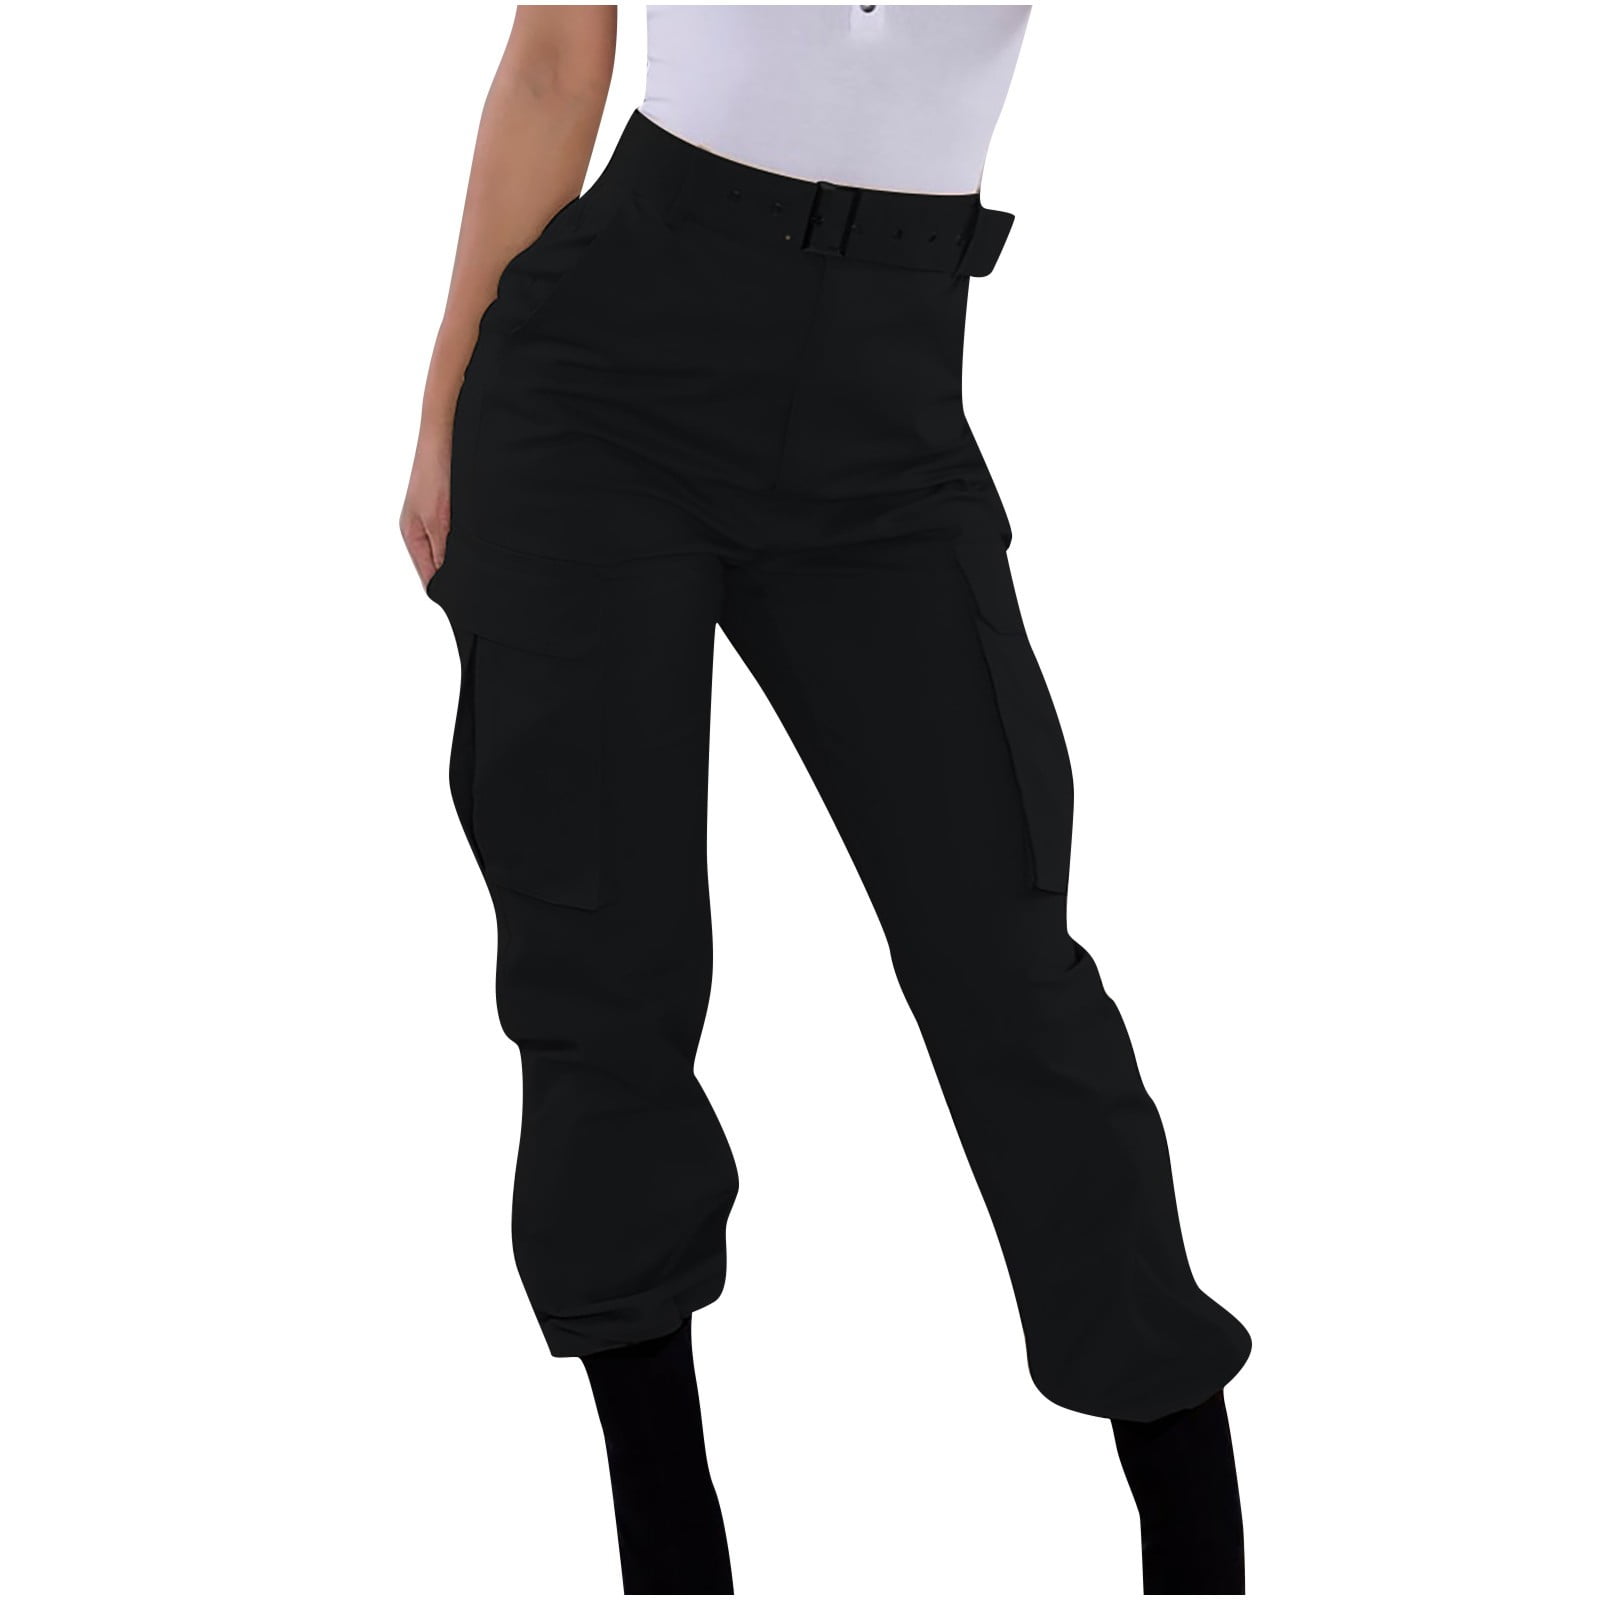 YYDGH Women's Lightweight Joggers Pants Quick Dry Running Hiking Pants  Athletic Workout Track Pants with Pockets Black 3XL